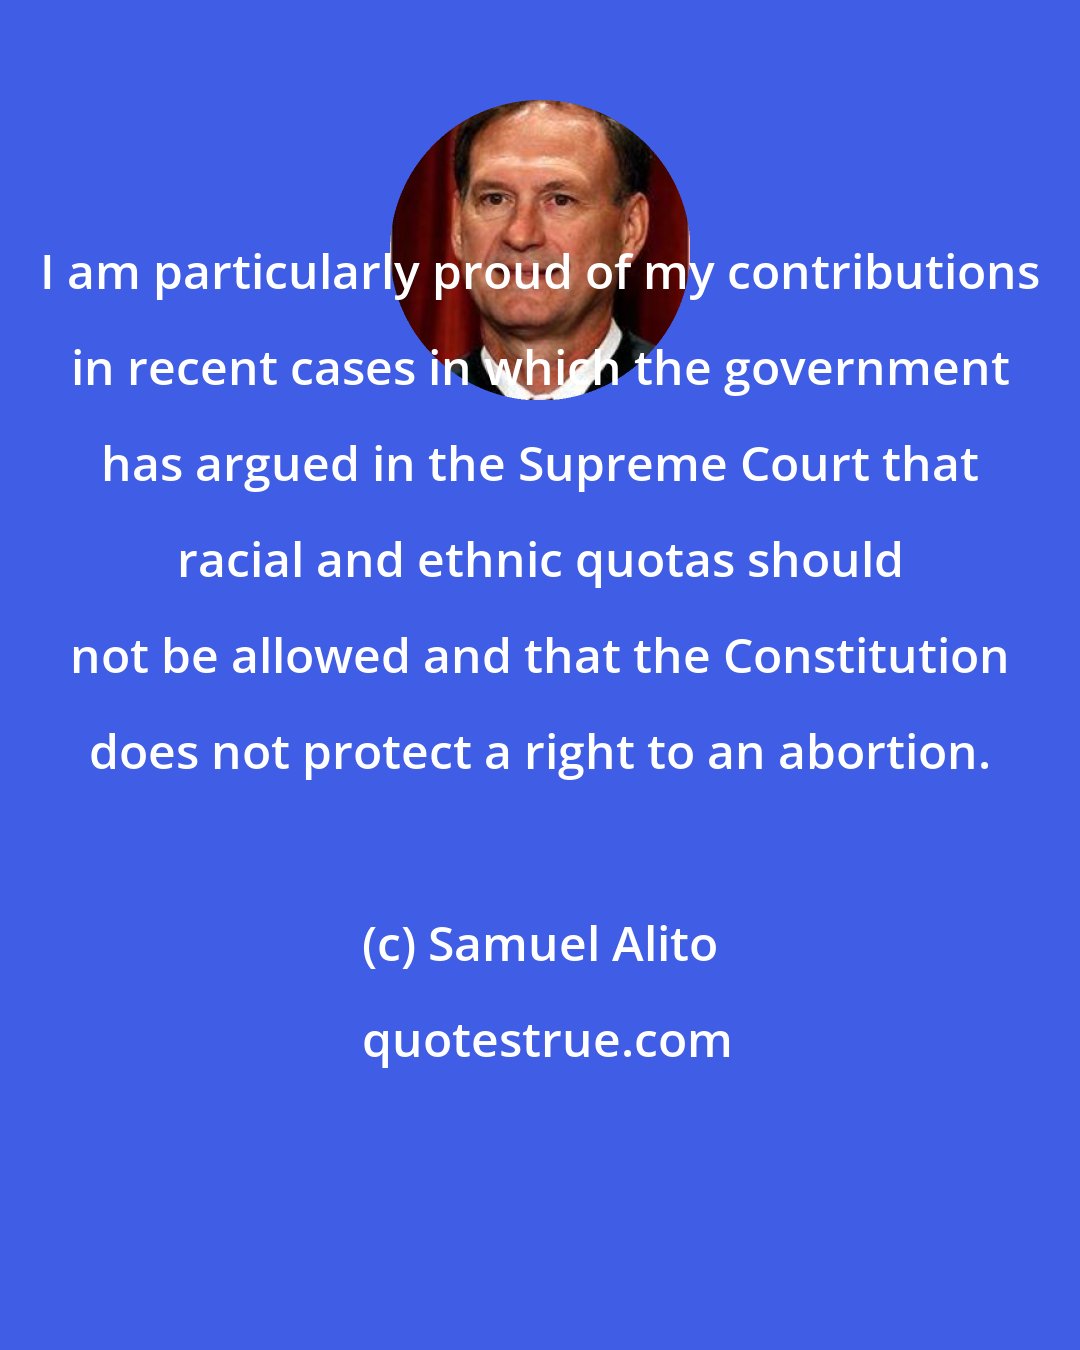 Samuel Alito: I am particularly proud of my contributions in recent cases in which the government has argued in the Supreme Court that racial and ethnic quotas should not be allowed and that the Constitution does not protect a right to an abortion.